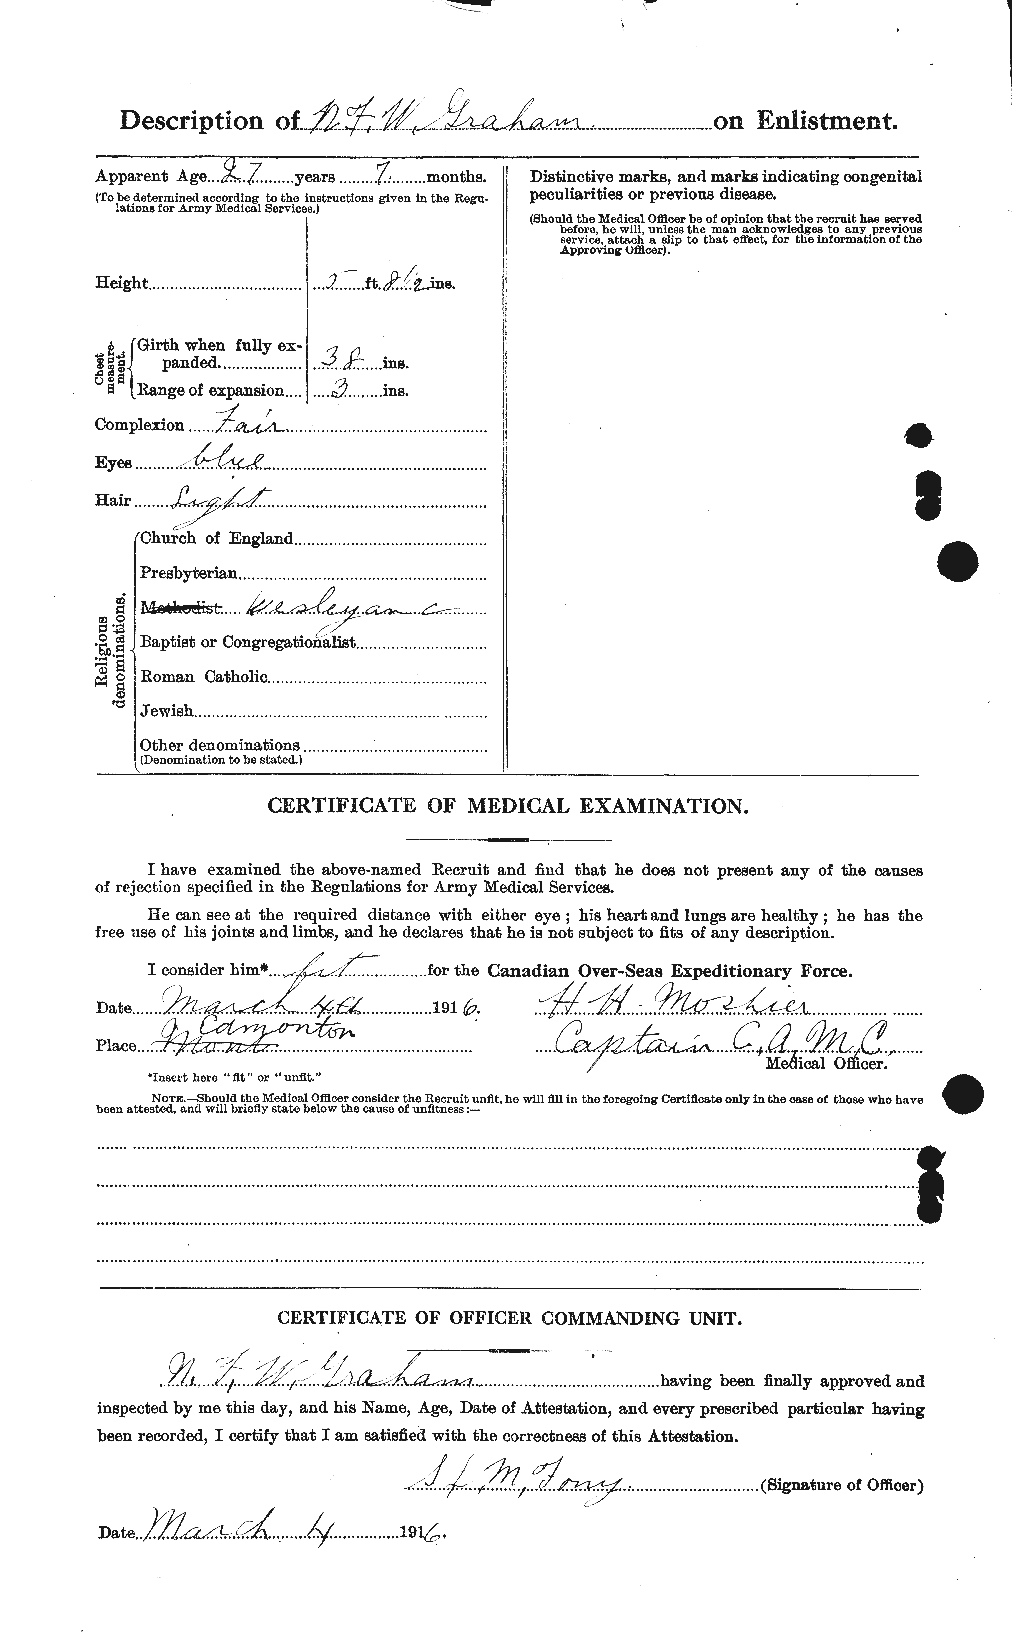 Personnel Records of the First World War - CEF 359316b